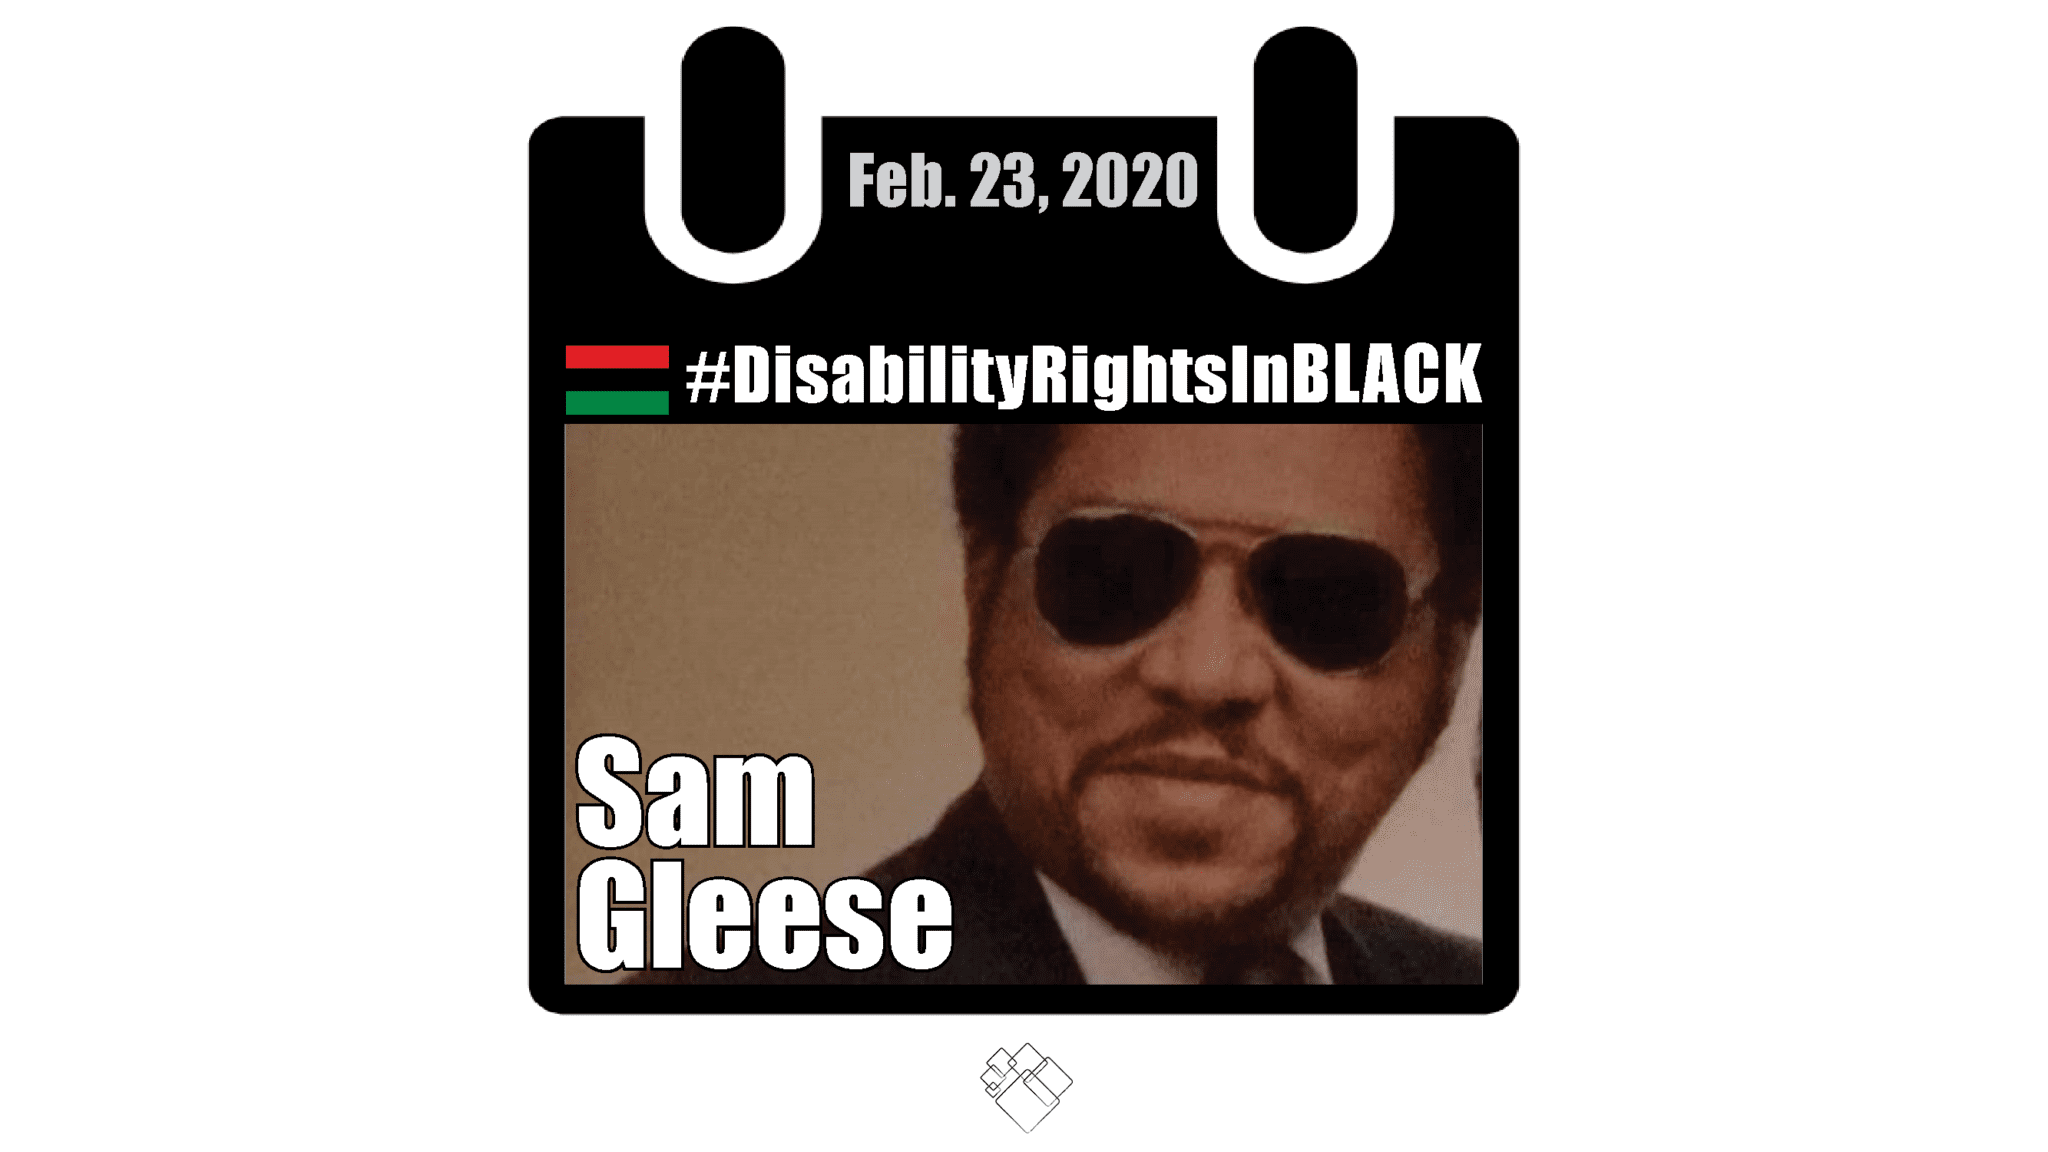 Sam Gleese smiles wearing aviator glasses, and wears a suit. The image of him has the Disability Rights in Black calendar style frame graphic with the hashtag for the series at the top and the date, February 23, 2020.